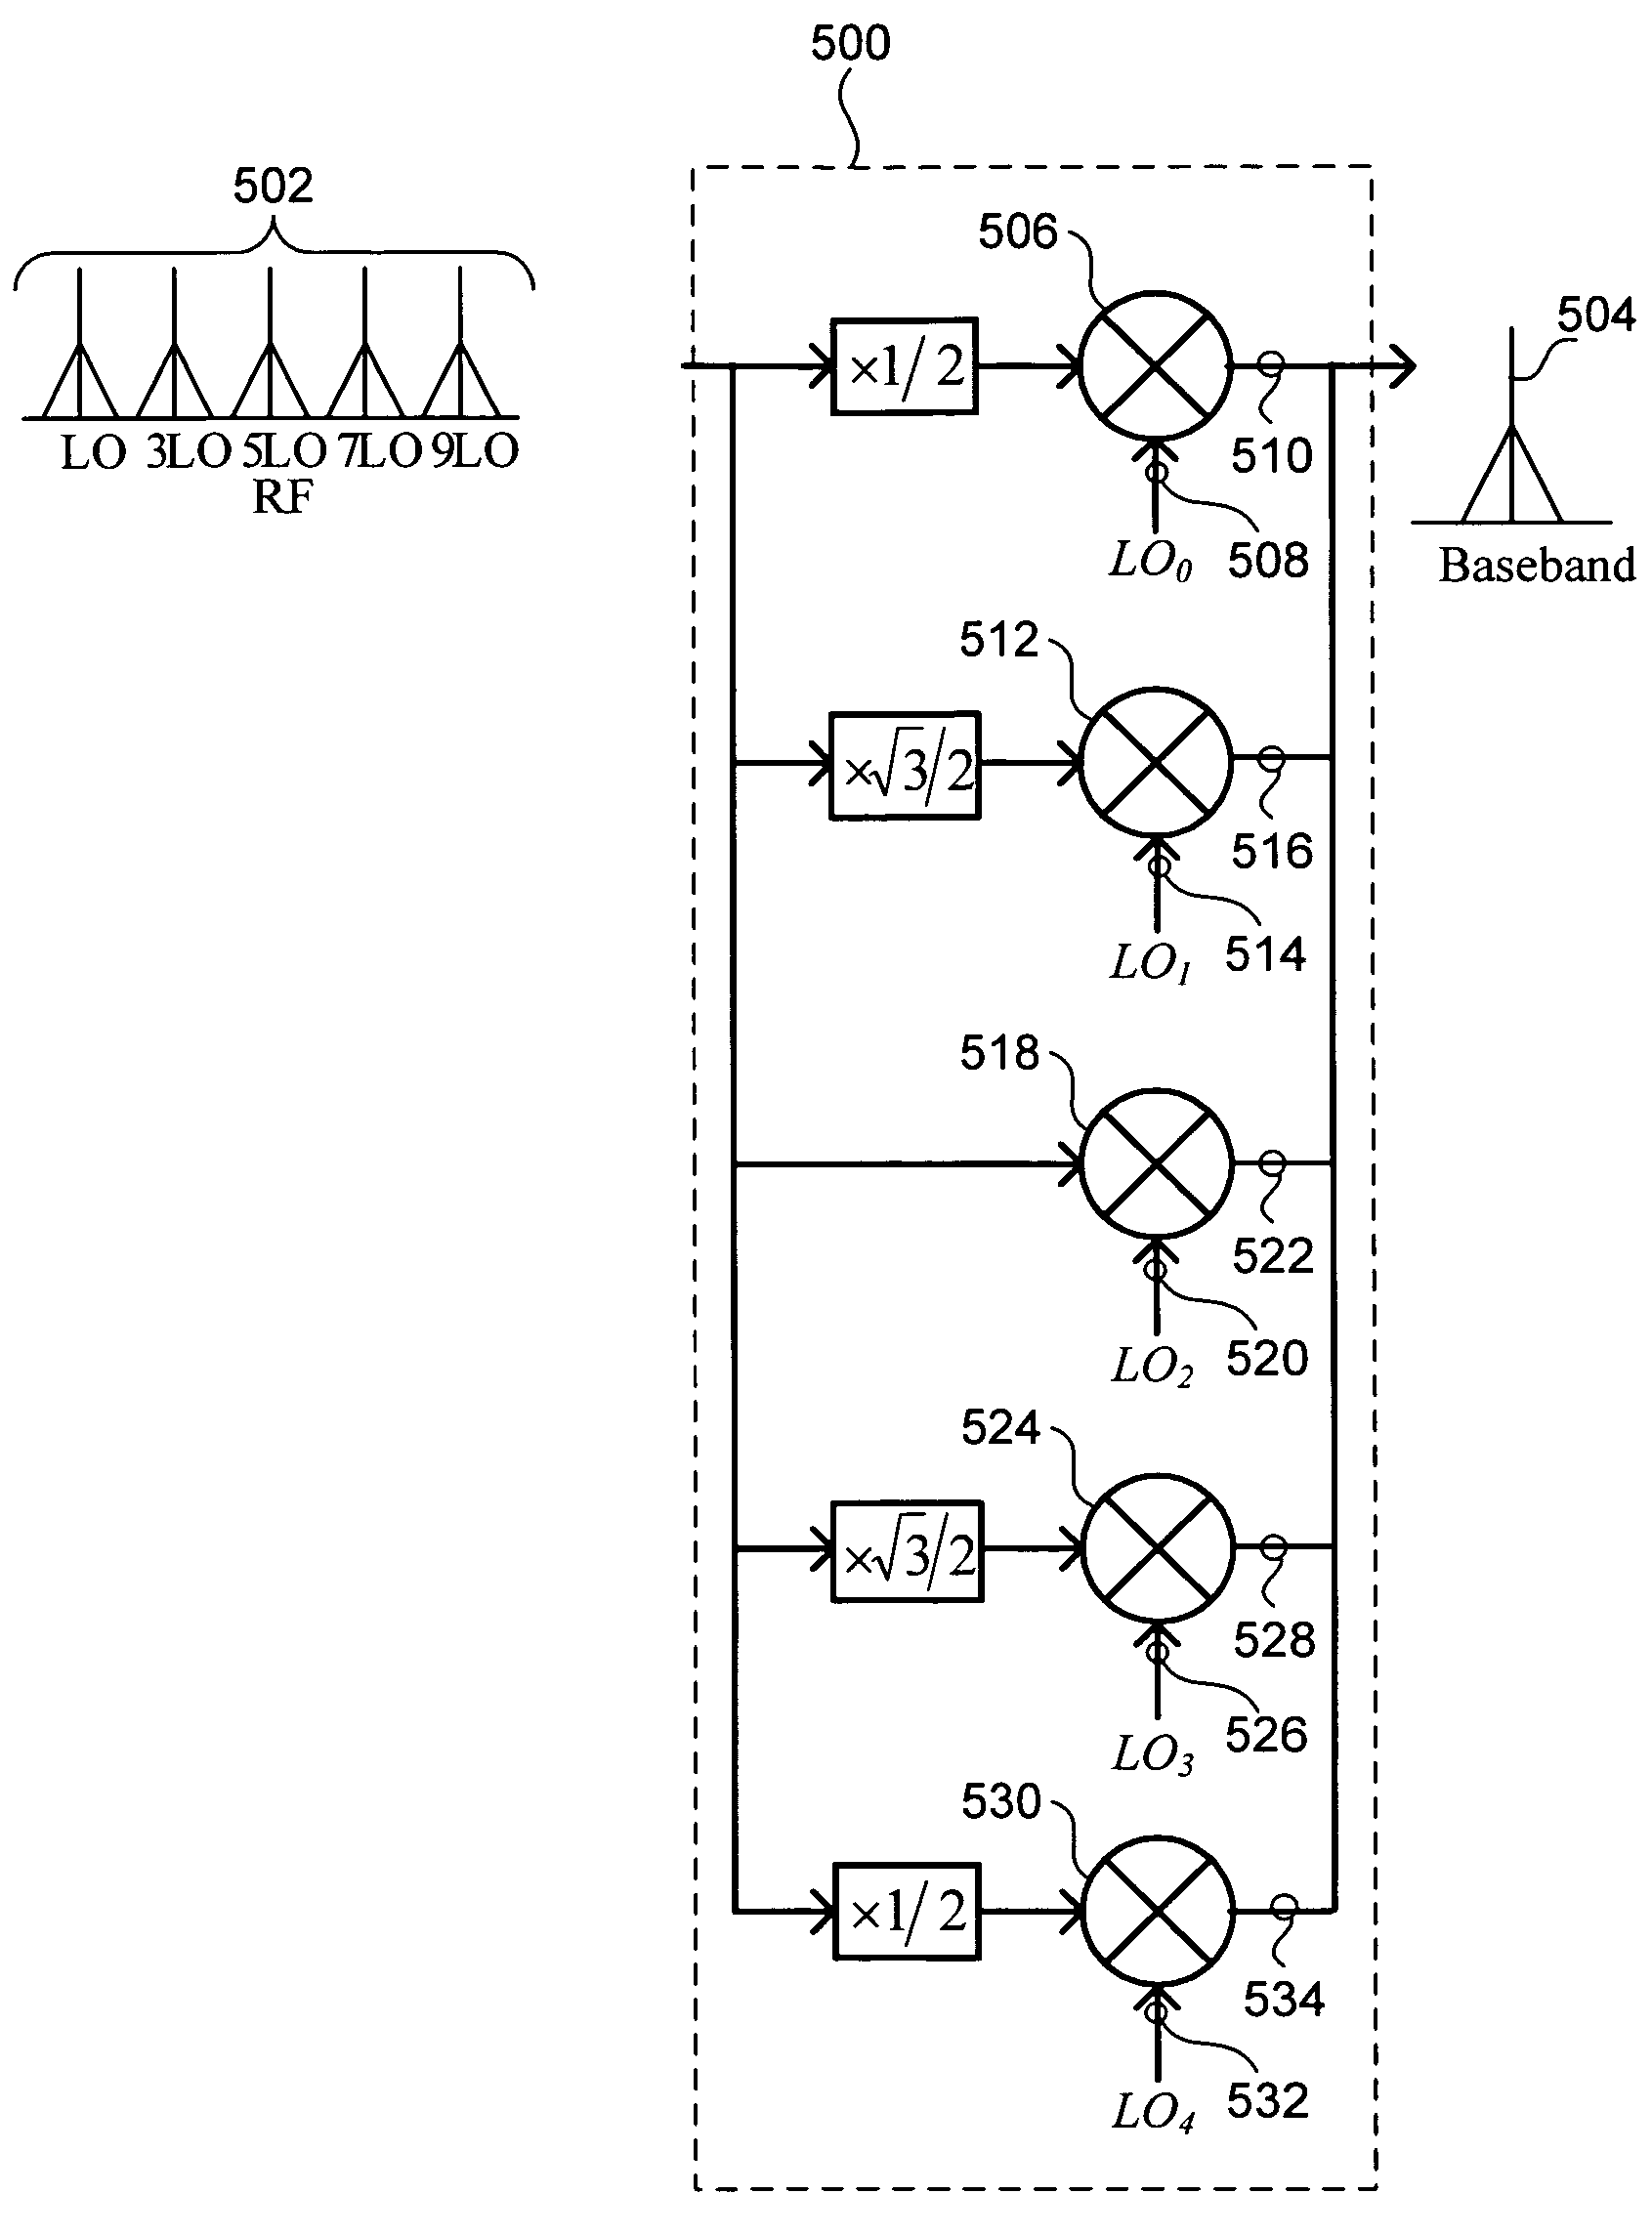 High-order harmonic rejection mixer using multiple LO phases